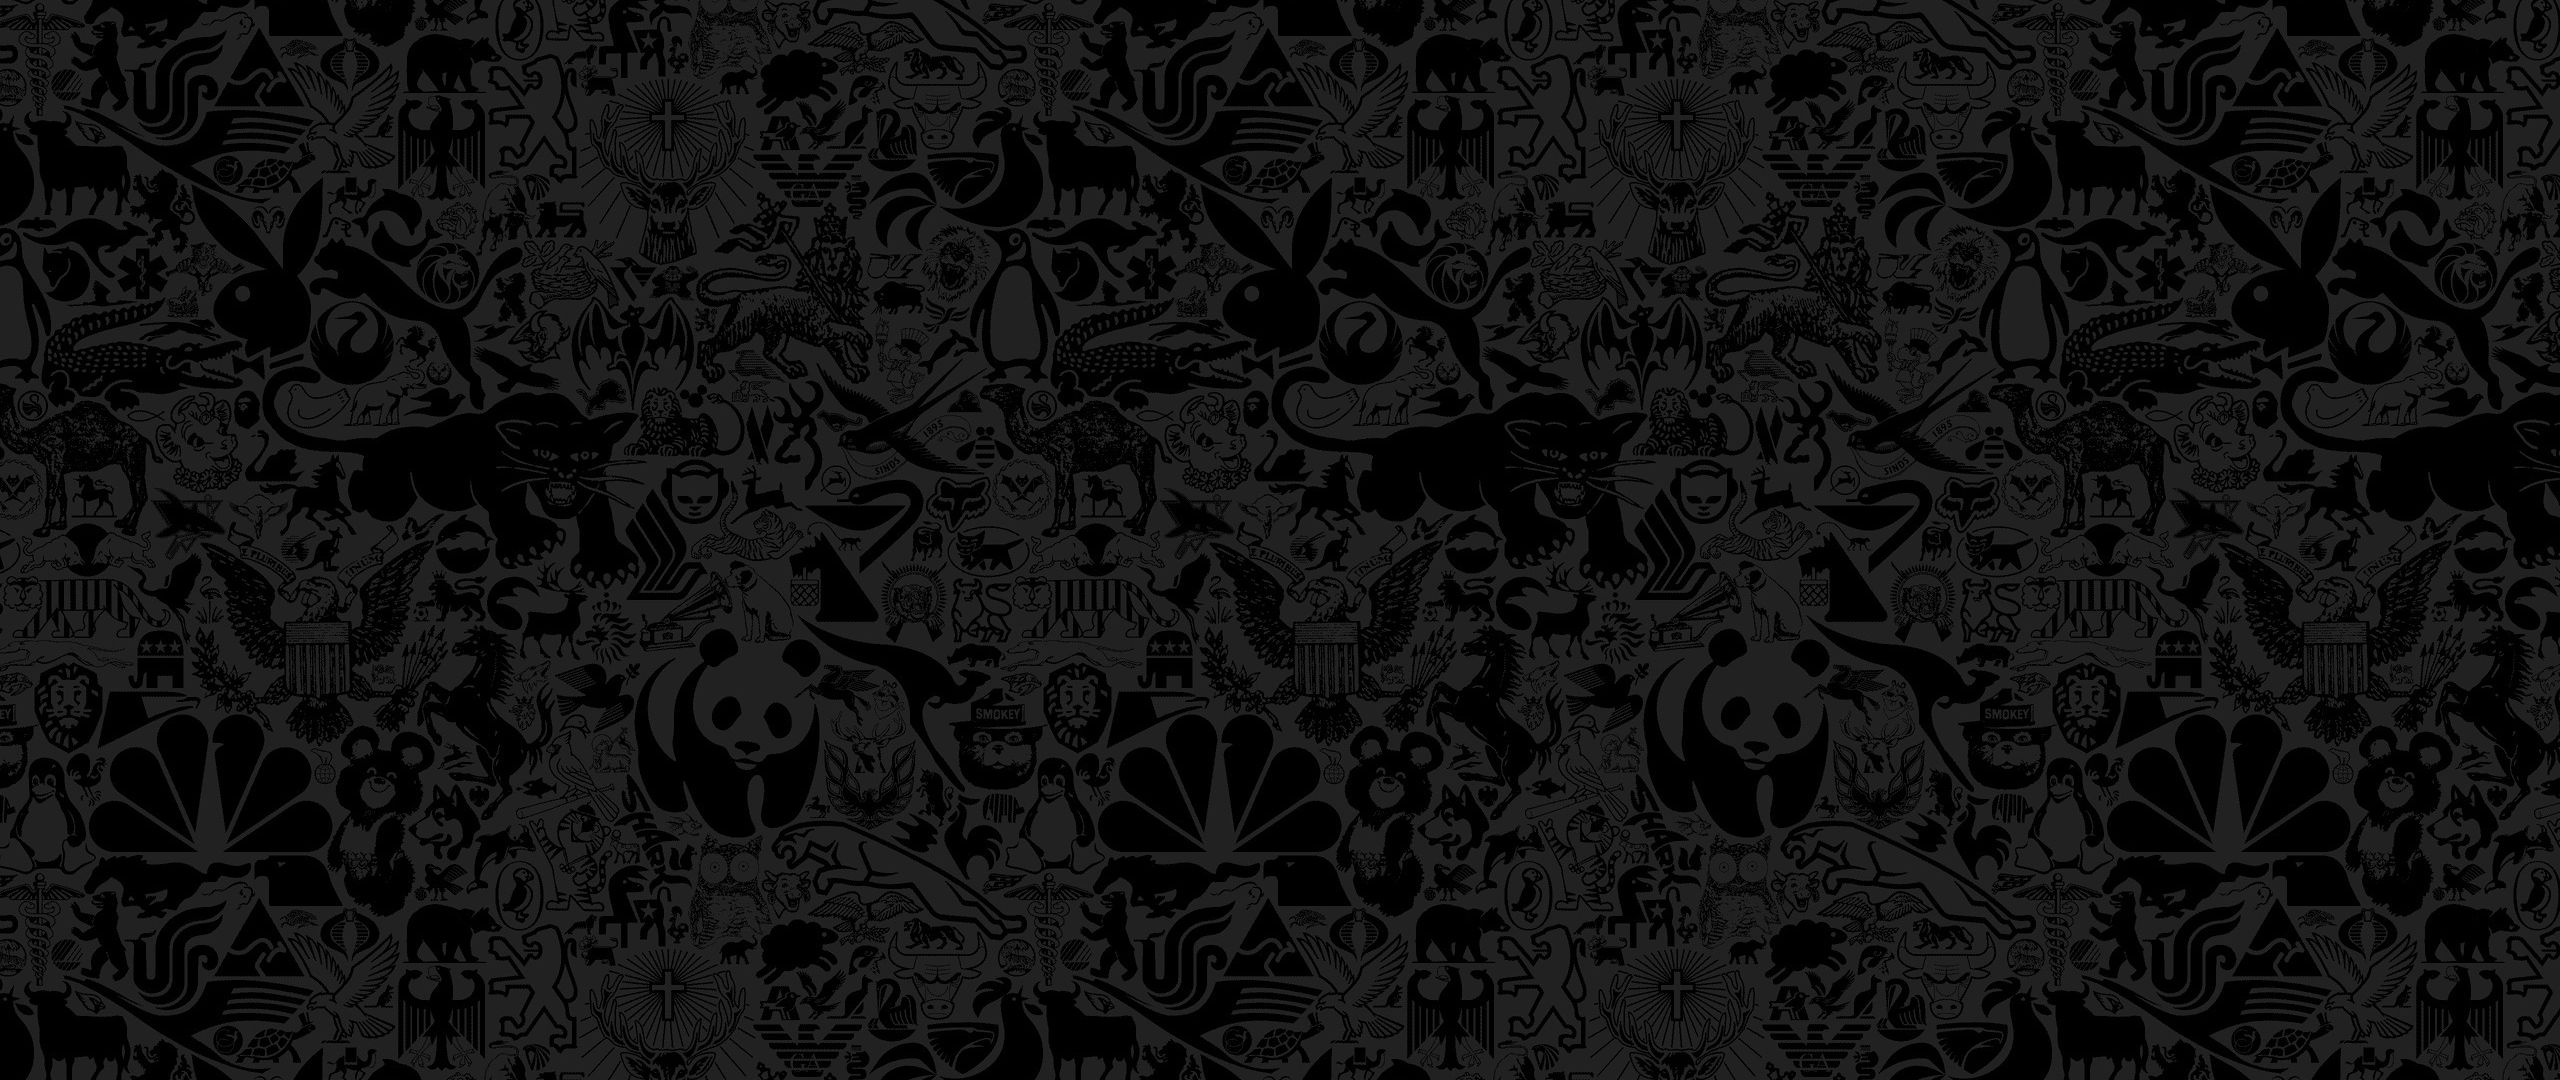 Download wallpaper 2560x1080 animals, drawing, black, wall dual wide ...